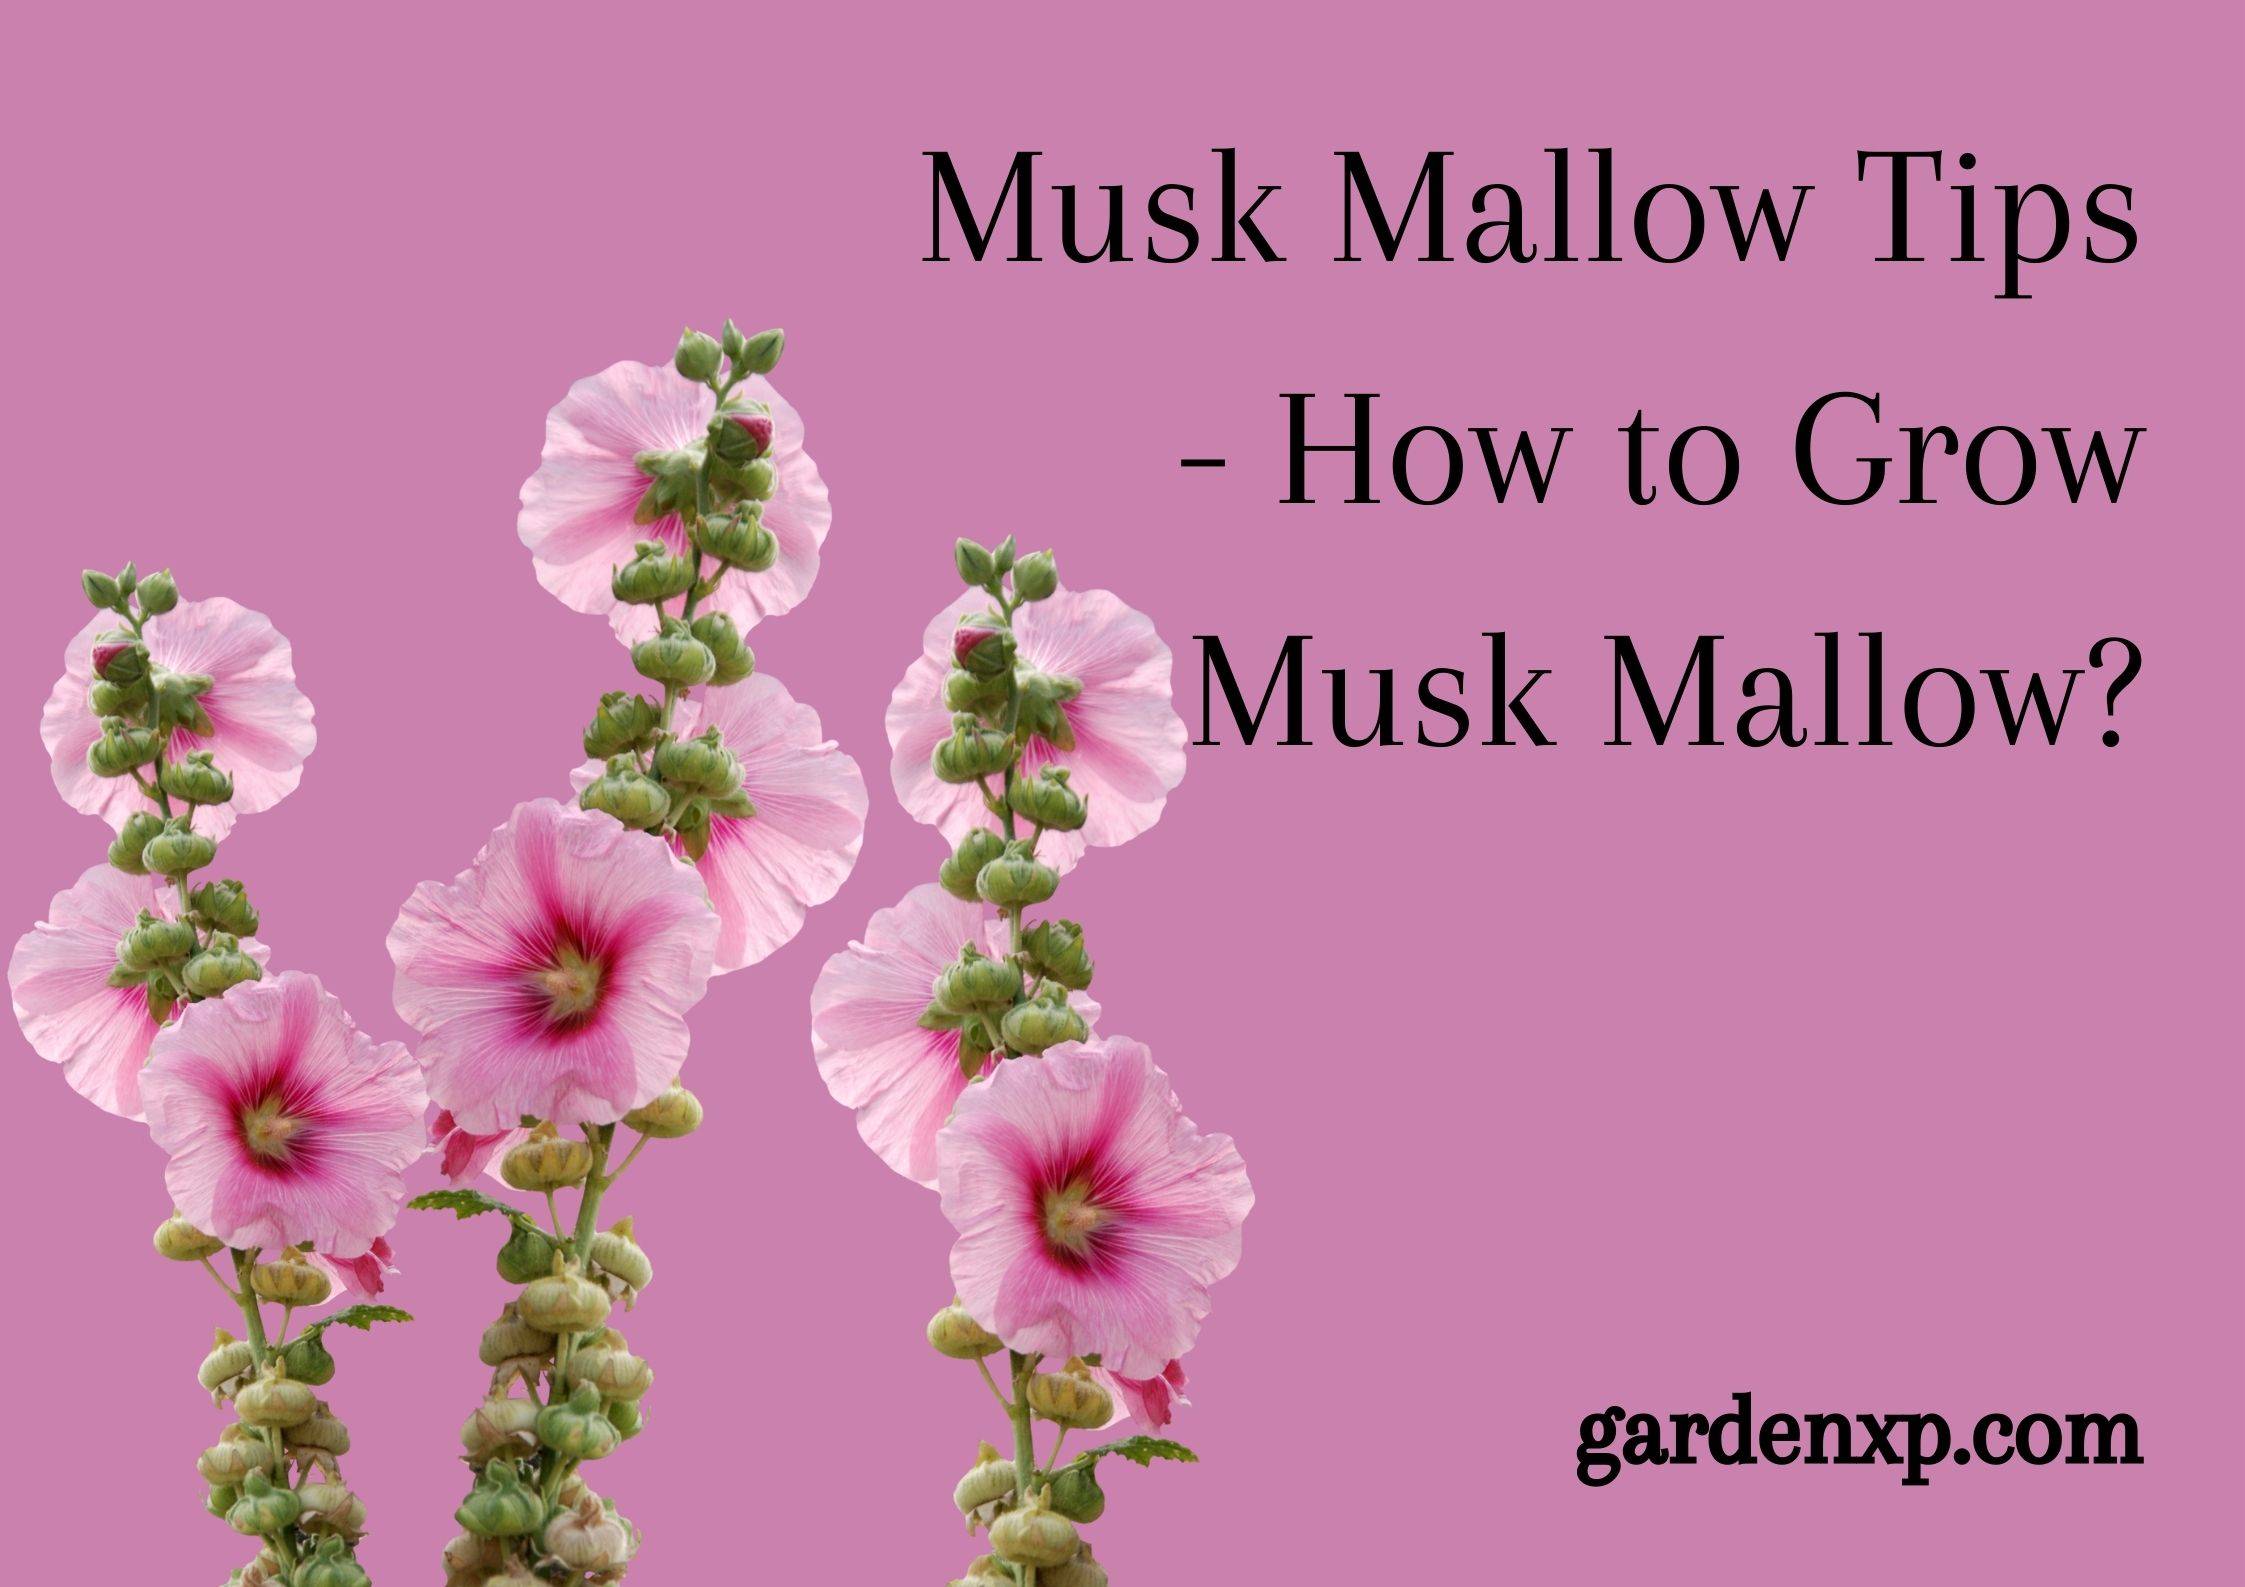 Musk Mallow Tips - How to Grow Musk Mallow?